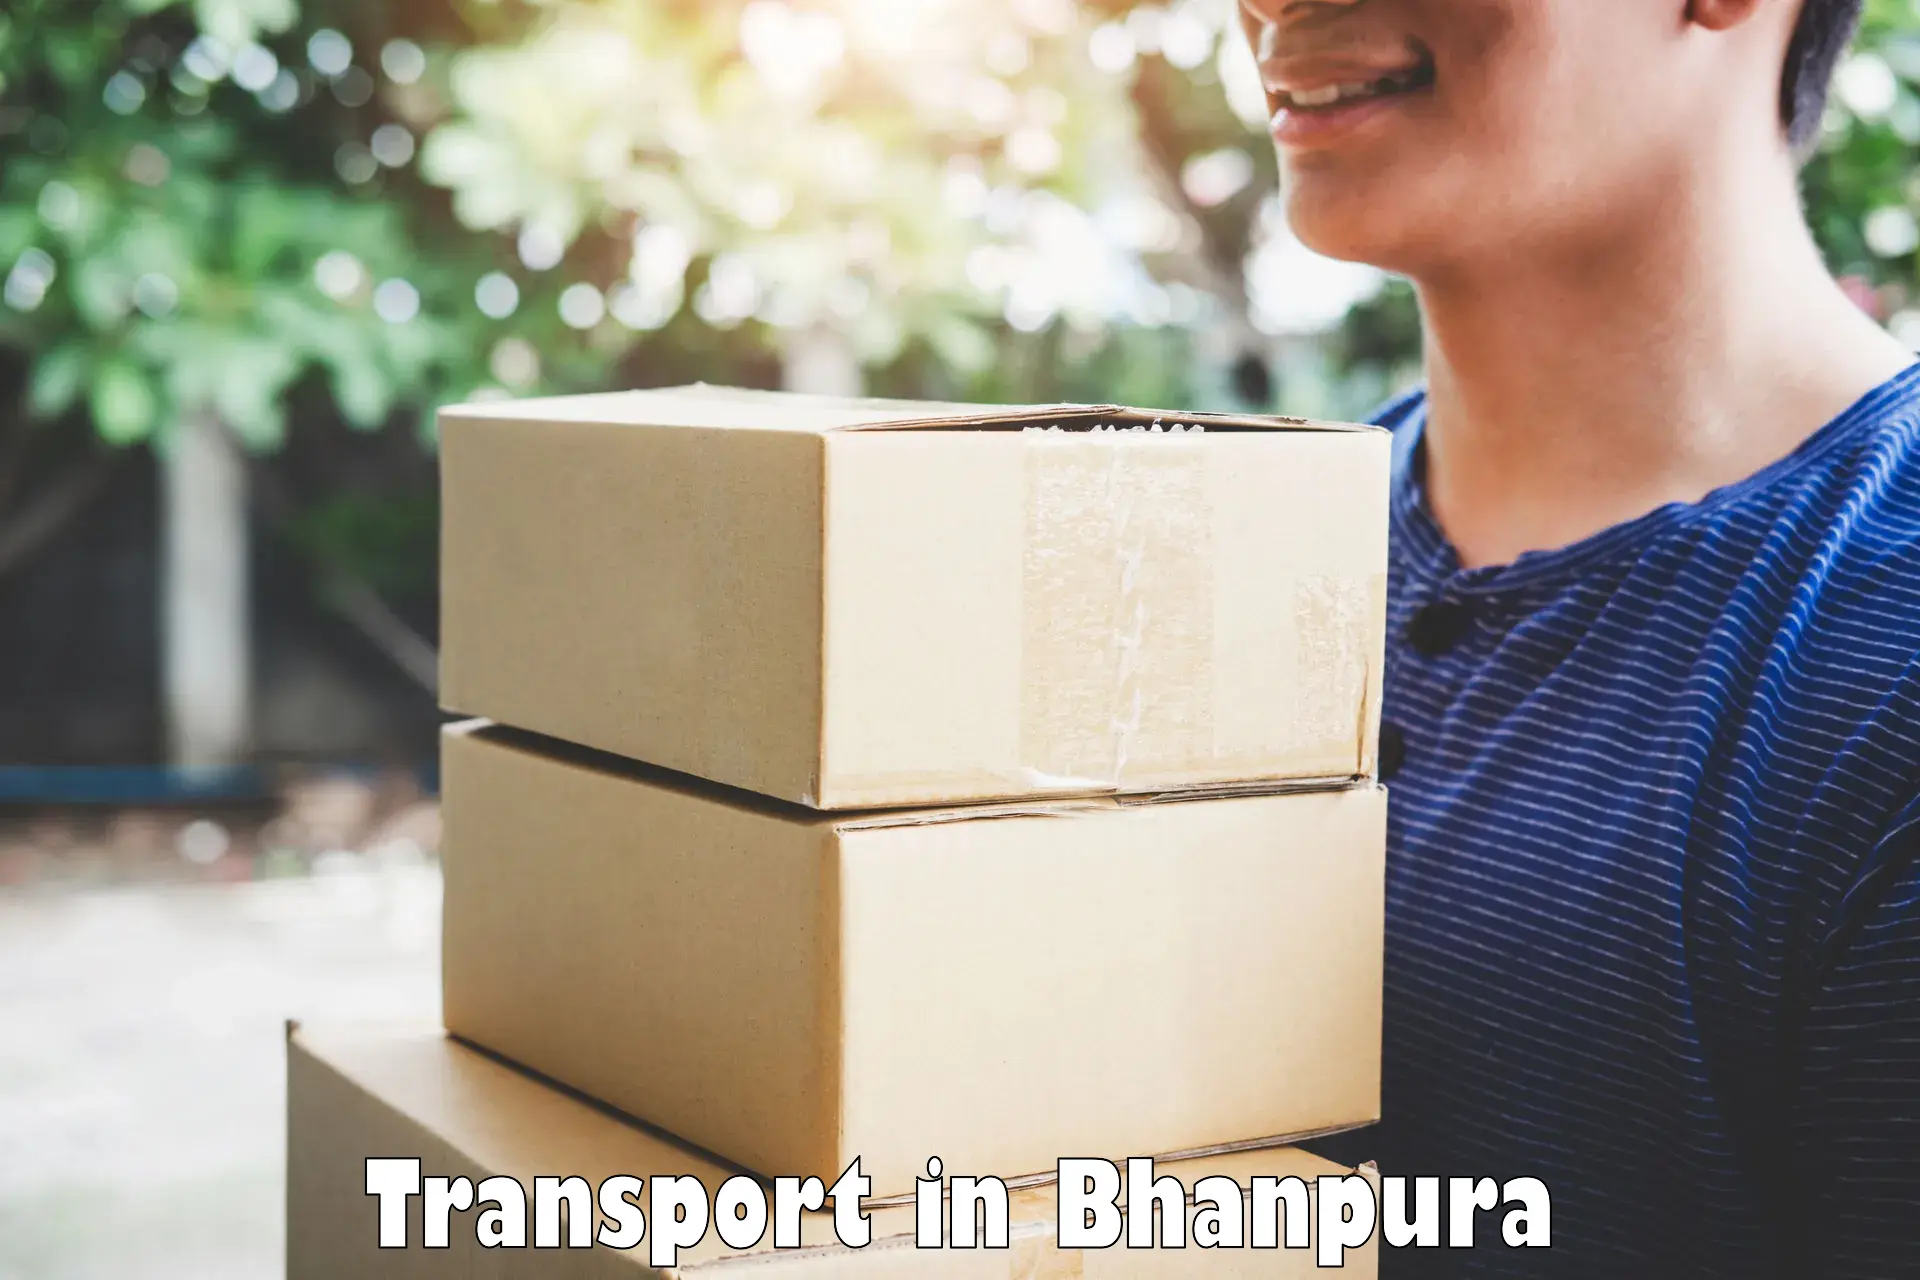 Road transport services in Bhanpura